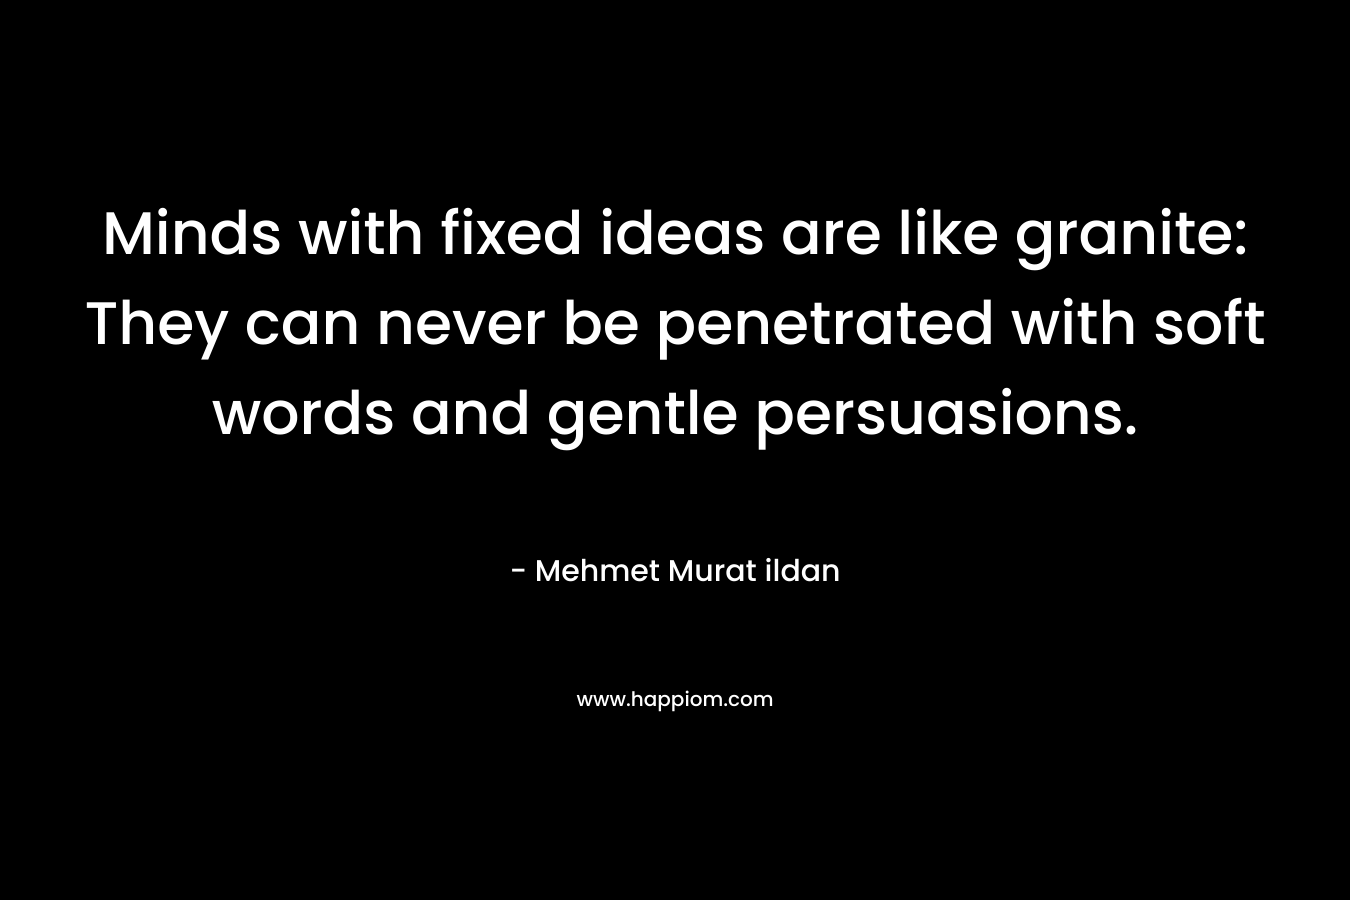 Minds with fixed ideas are like granite: They can never be penetrated with soft words and gentle persuasions. – Mehmet Murat ildan